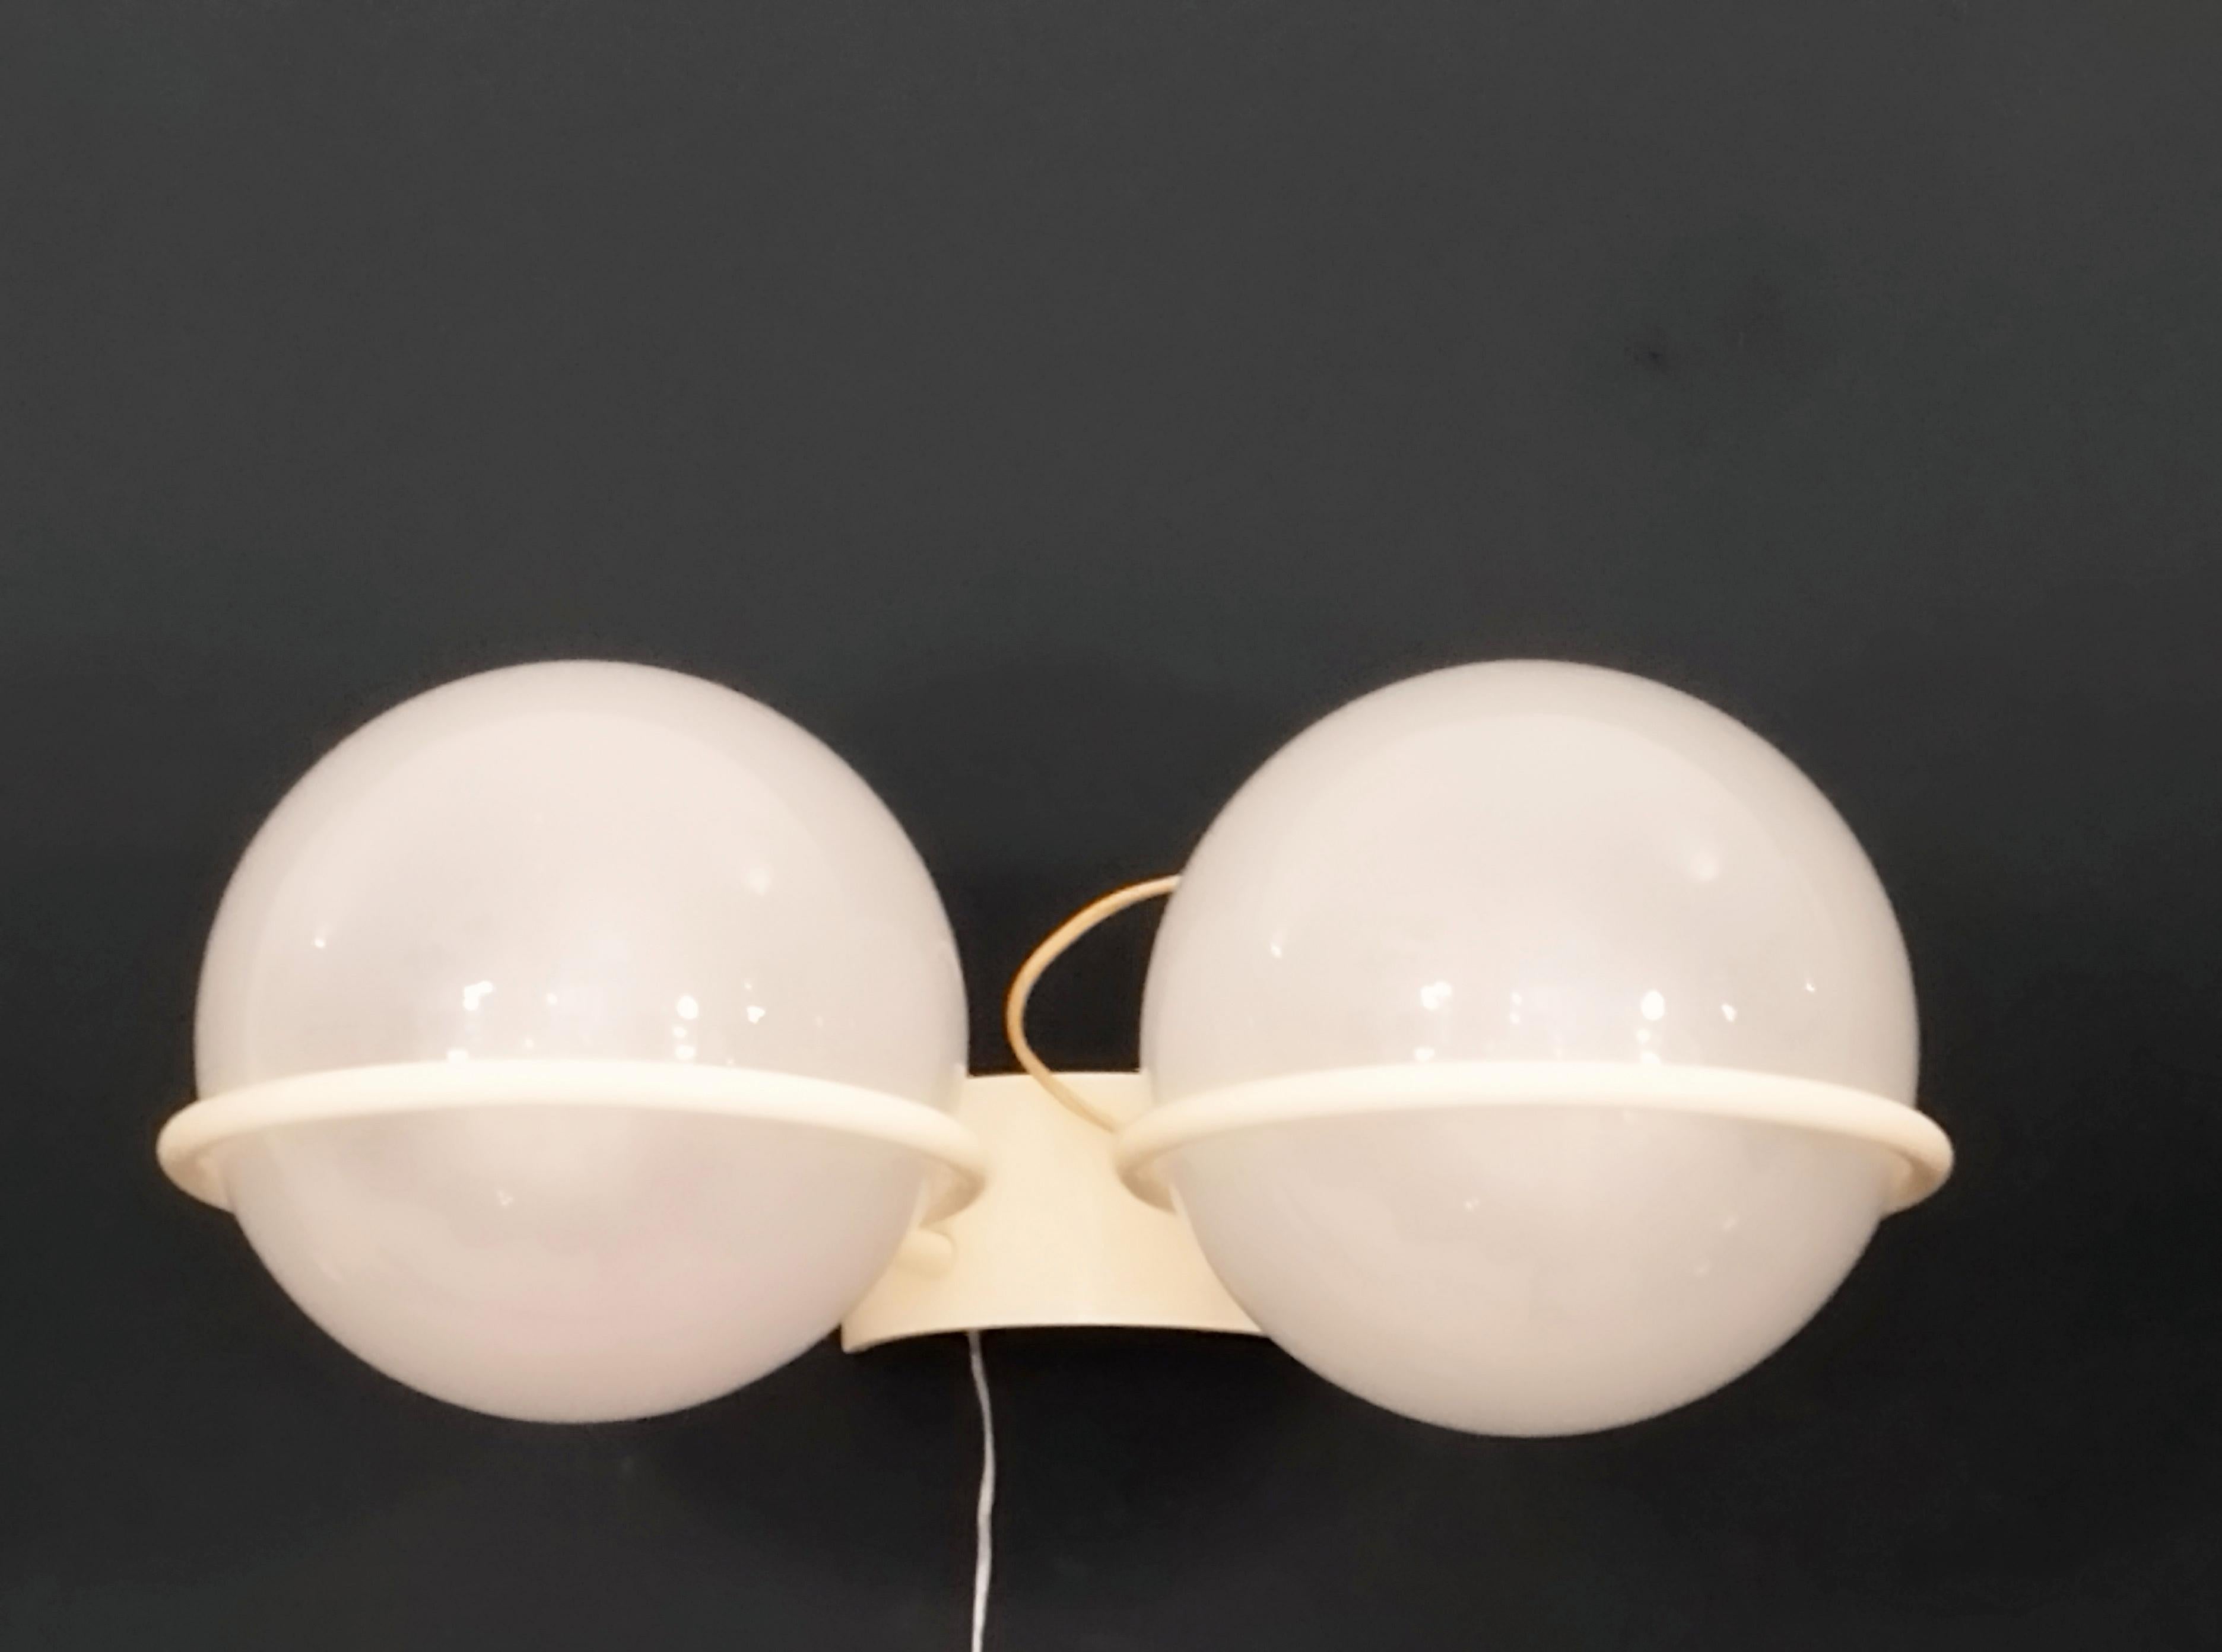 Stunning three-light wall lamp model 238/3 by Gino Sarfatti for Arteluce 1950s. In excellent original condition. The brass wall plate with arms bent to form circles houses translucent glass globes with cylindrical aluminium fuses and lamp holders. 